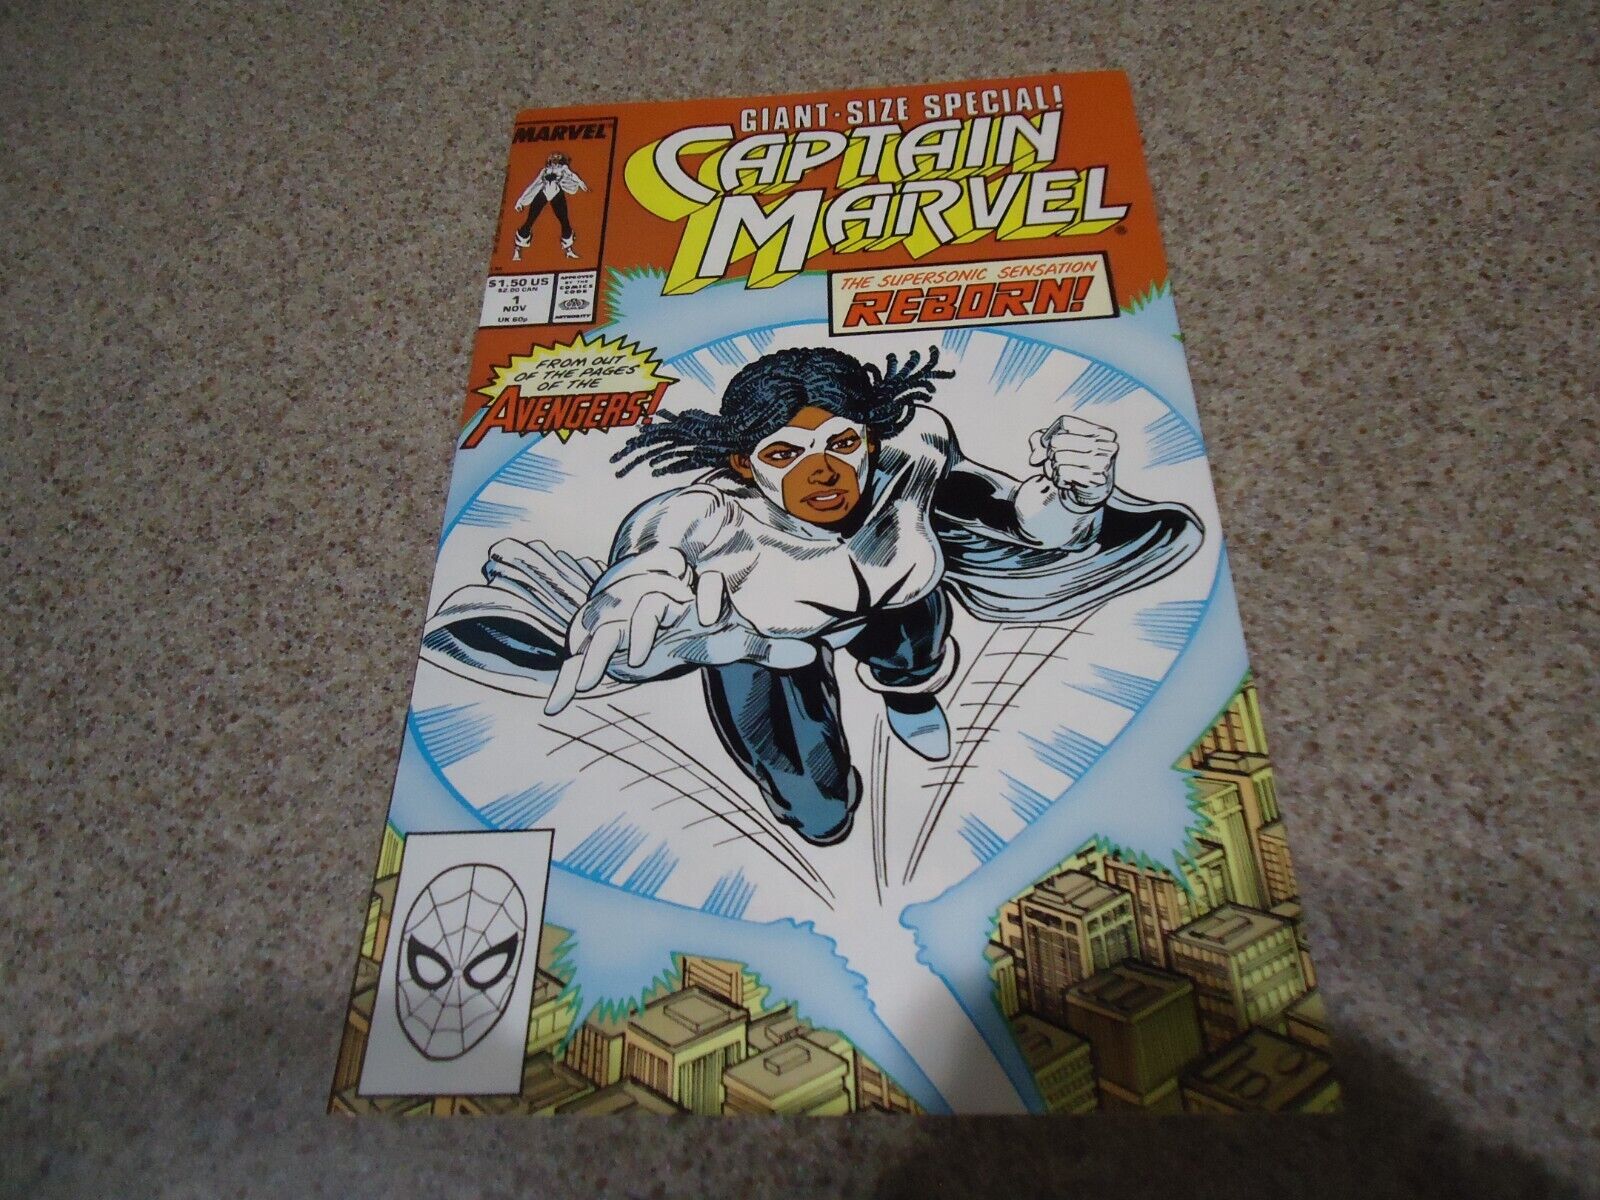 CAPTAIN MARVEL GIANT SIZE SPECIAL #1